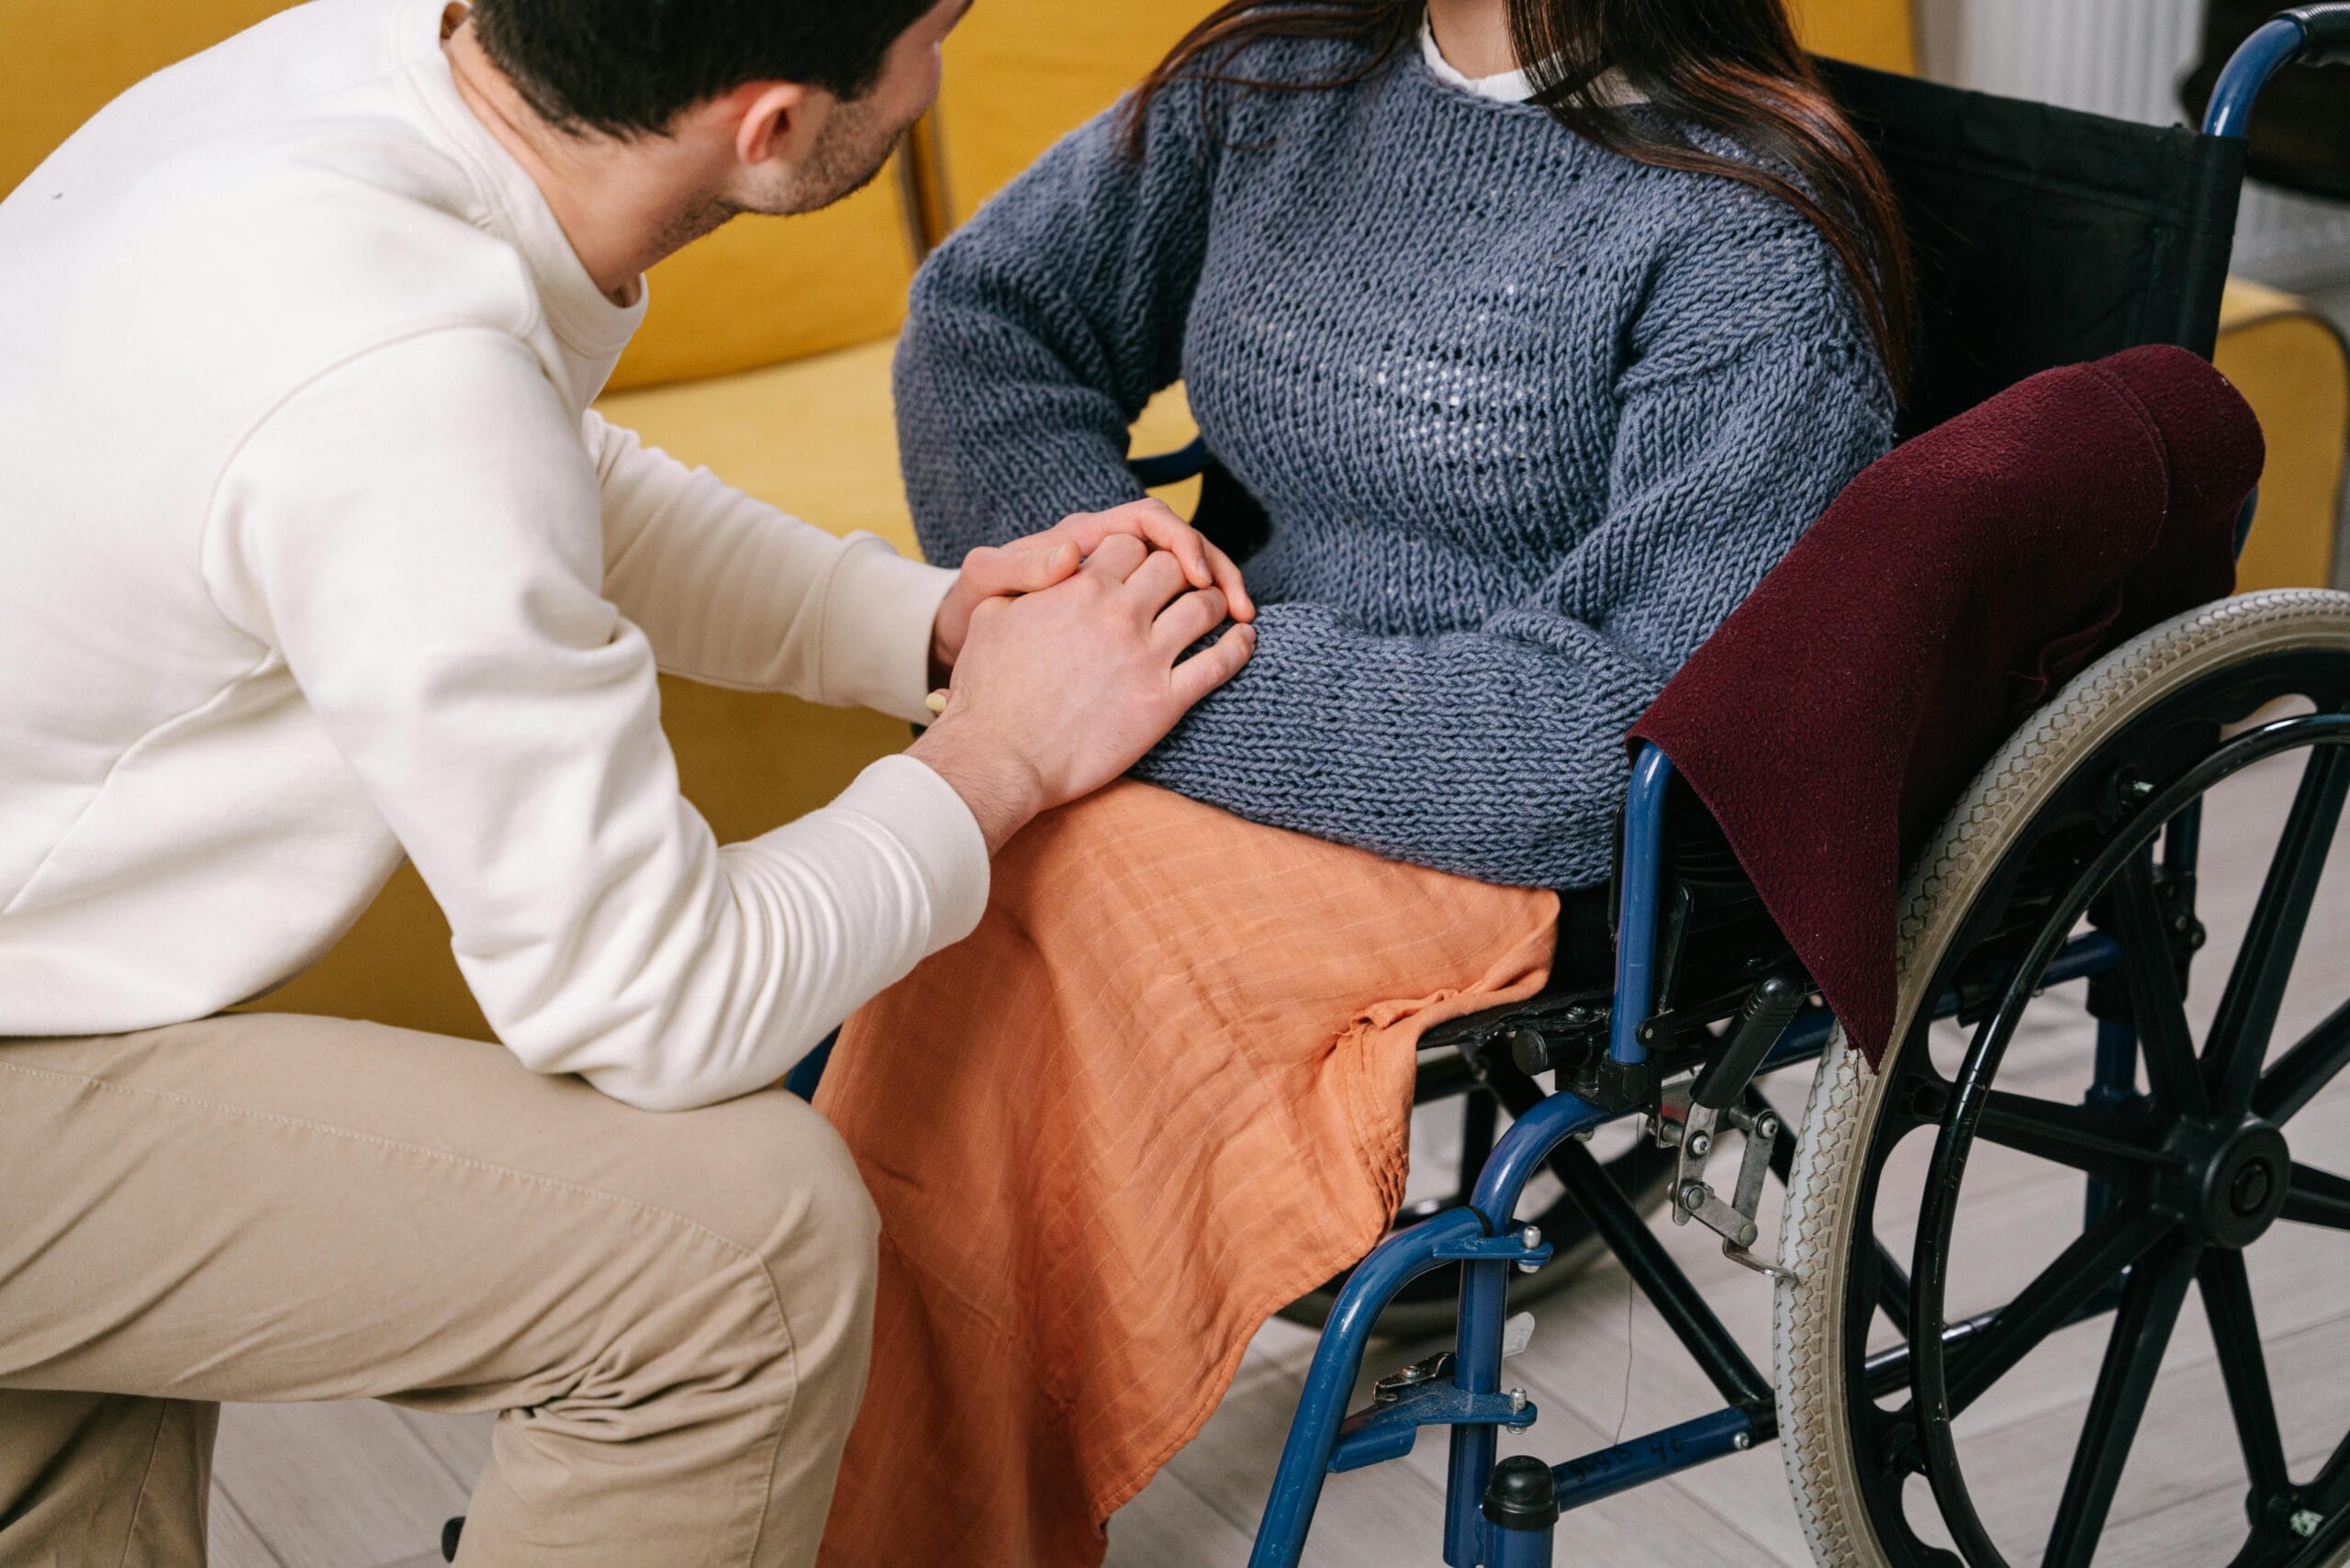 Man Holding Disabled Woman's Hands